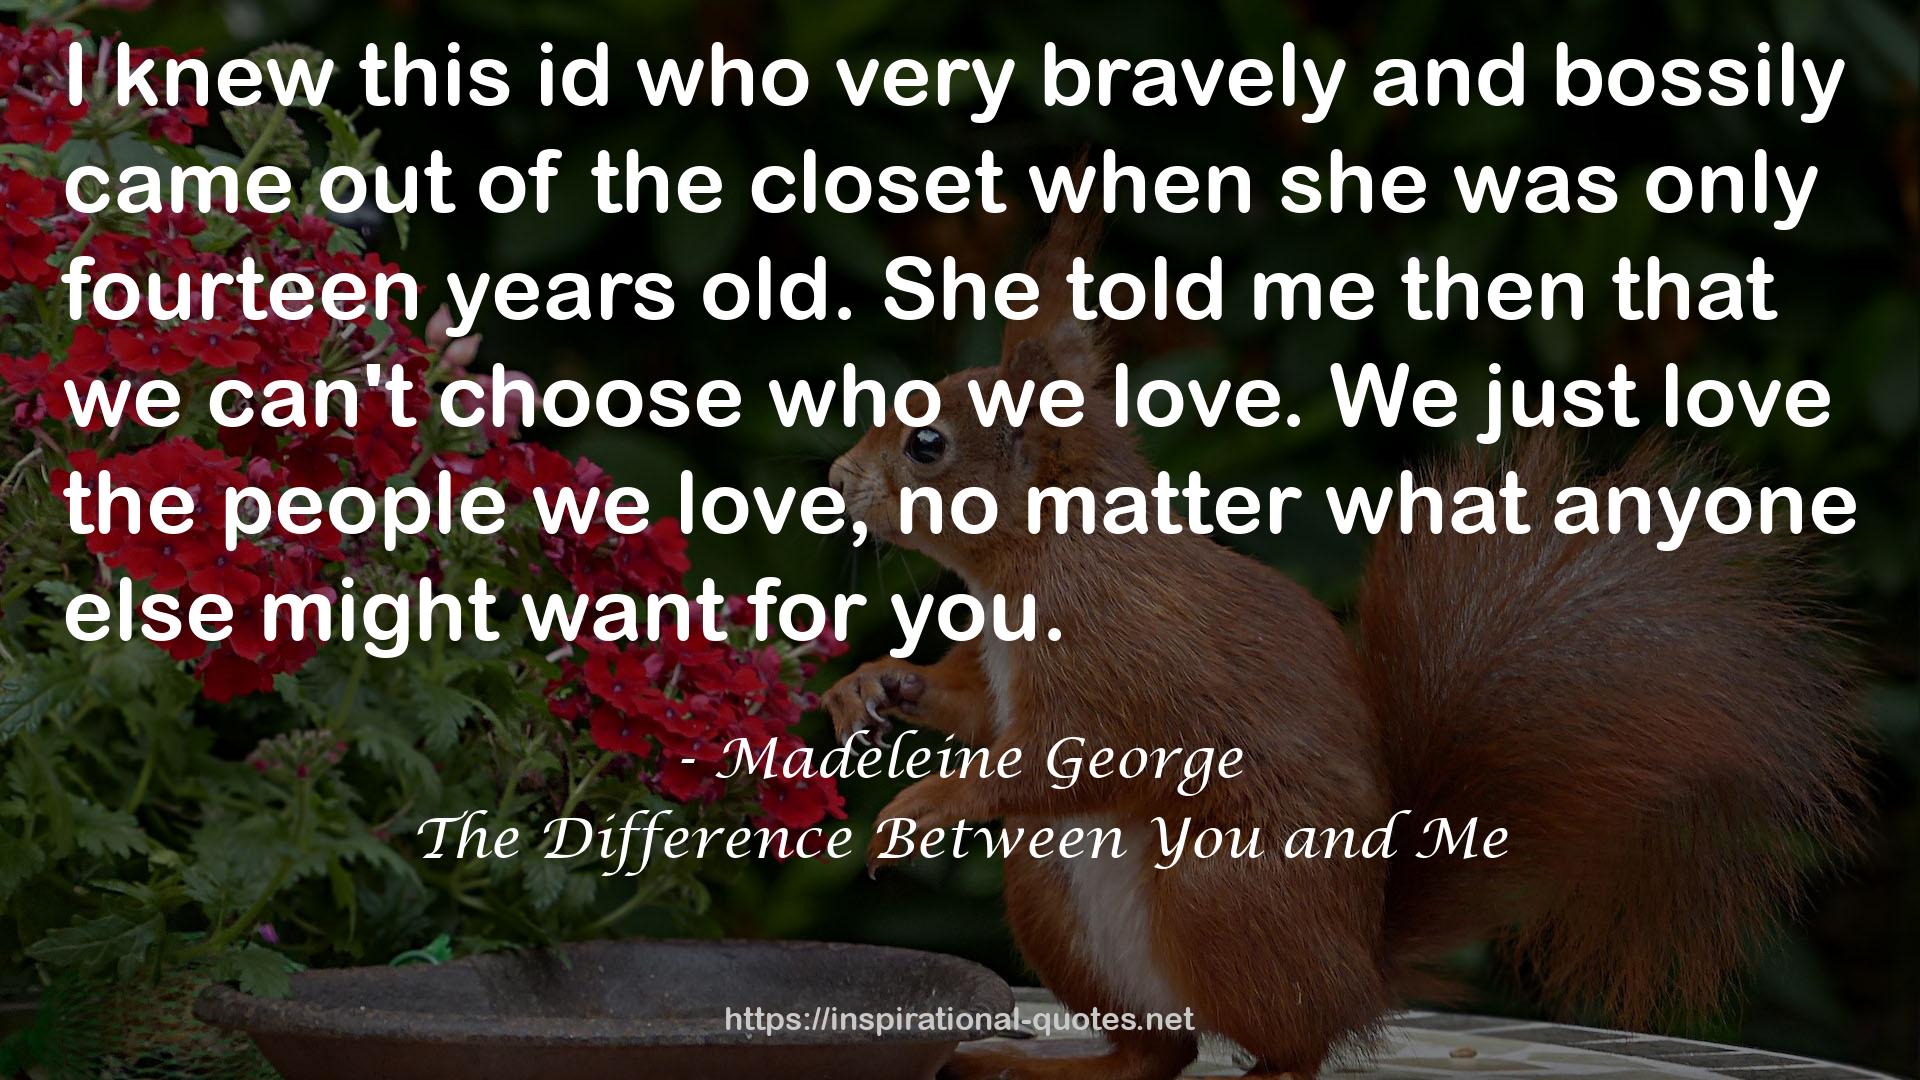 The Difference Between You and Me QUOTES